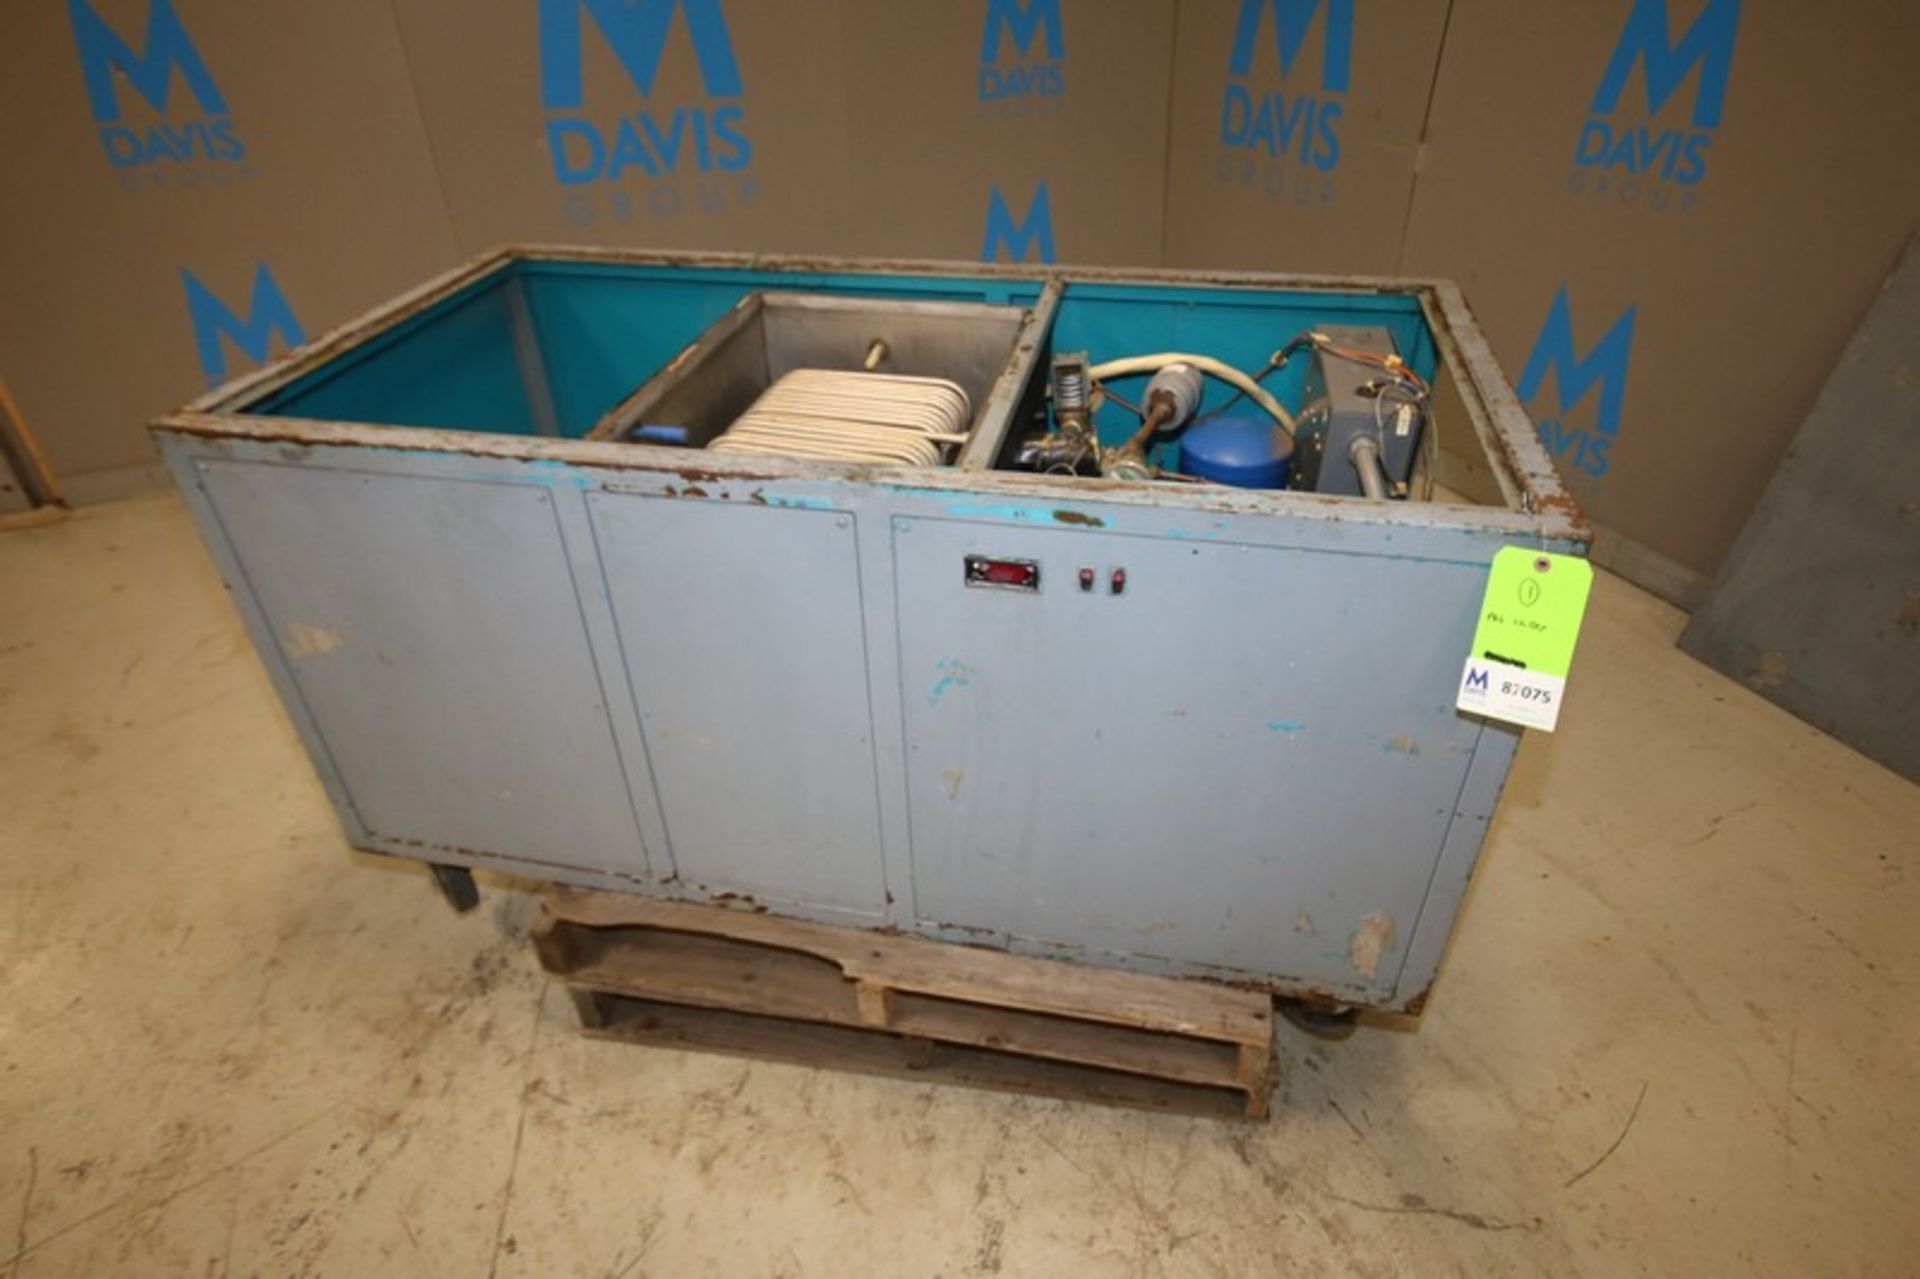 5' L x 30" W x 27" Portable Package Chiller Unit, with Maneurop Freon Compressor Model CMTW641, SN